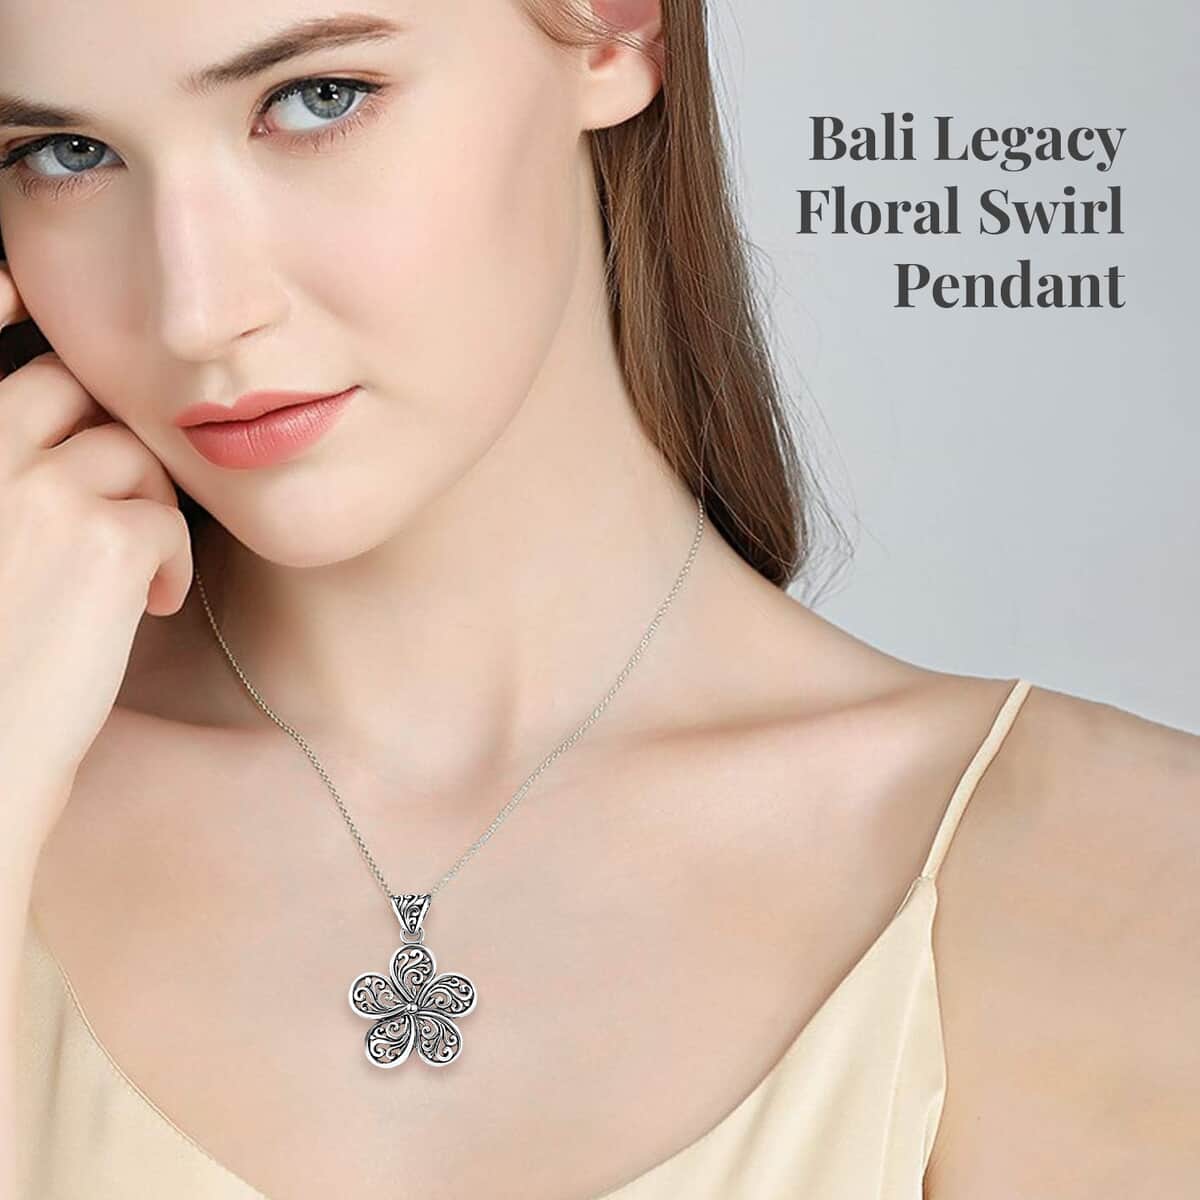 Mother’s Day Gift Bali Legacy Floral Pendant, Swirl Pendant, Silver Flower Pendant, Sterling Silver Pendant, Filigree Pendant 2.85 Grams image number 2